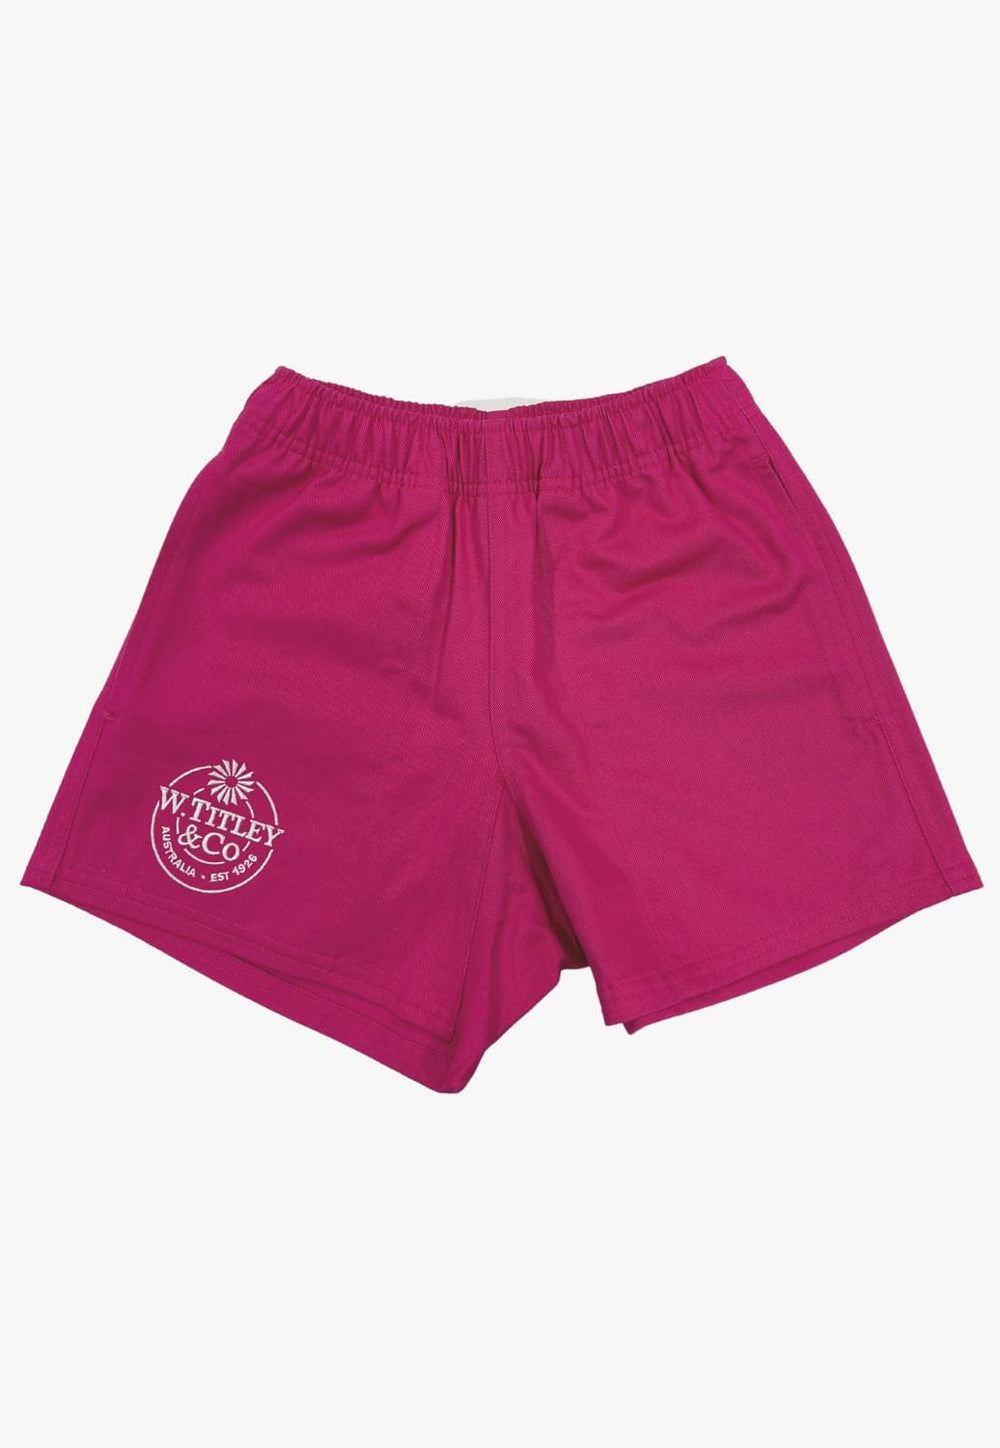 Girl's Rugby Shorts - W. Titley & Co